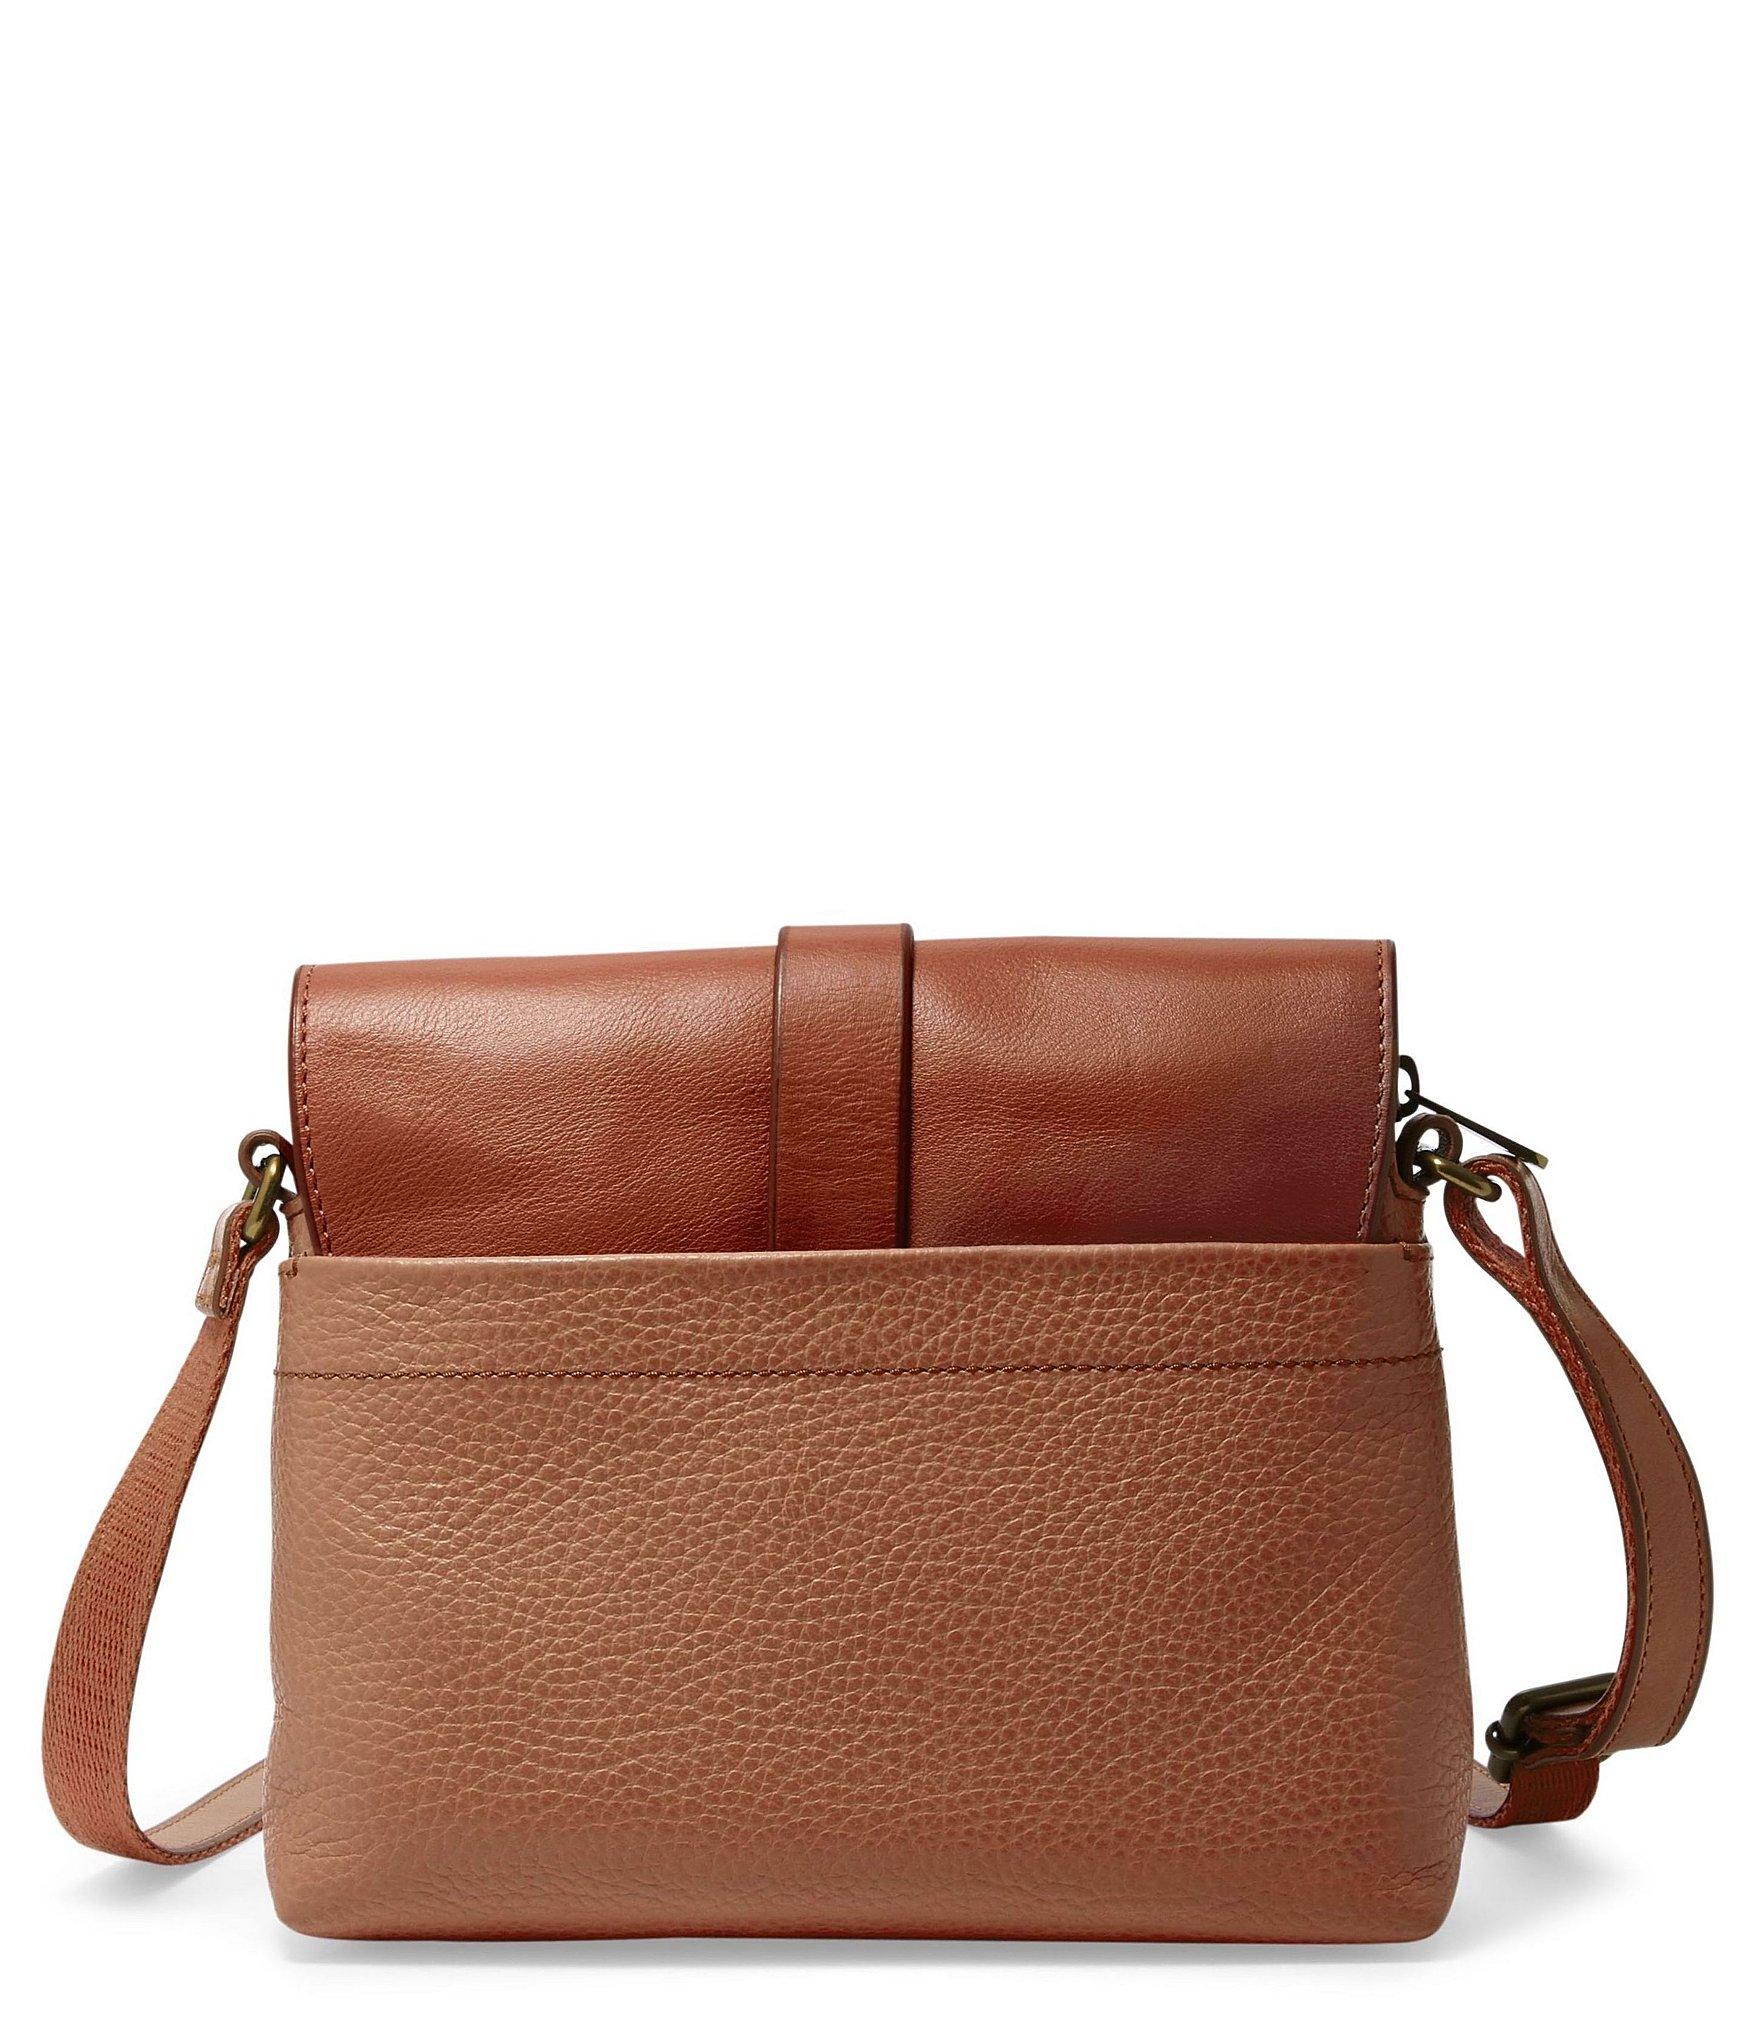 Fossil Cotton Kinley Small Crossbody Bag in Brown - Lyst